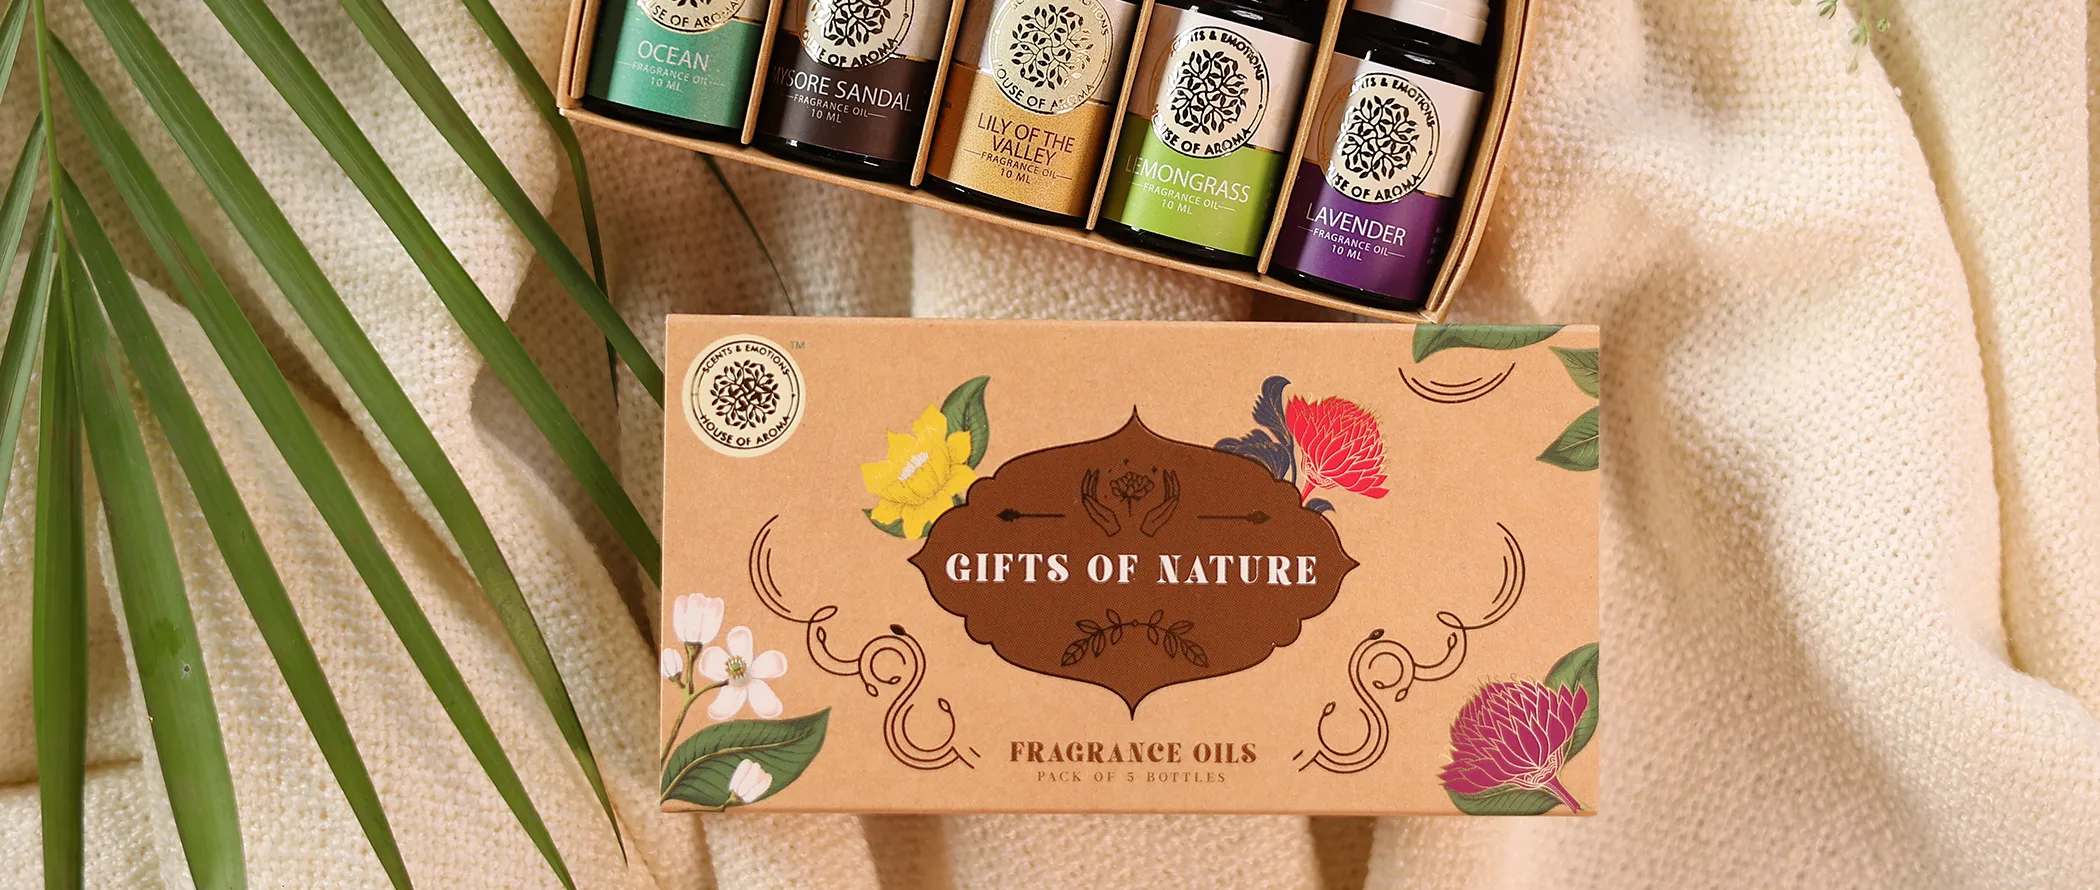 House of aroma packaging design copy 6